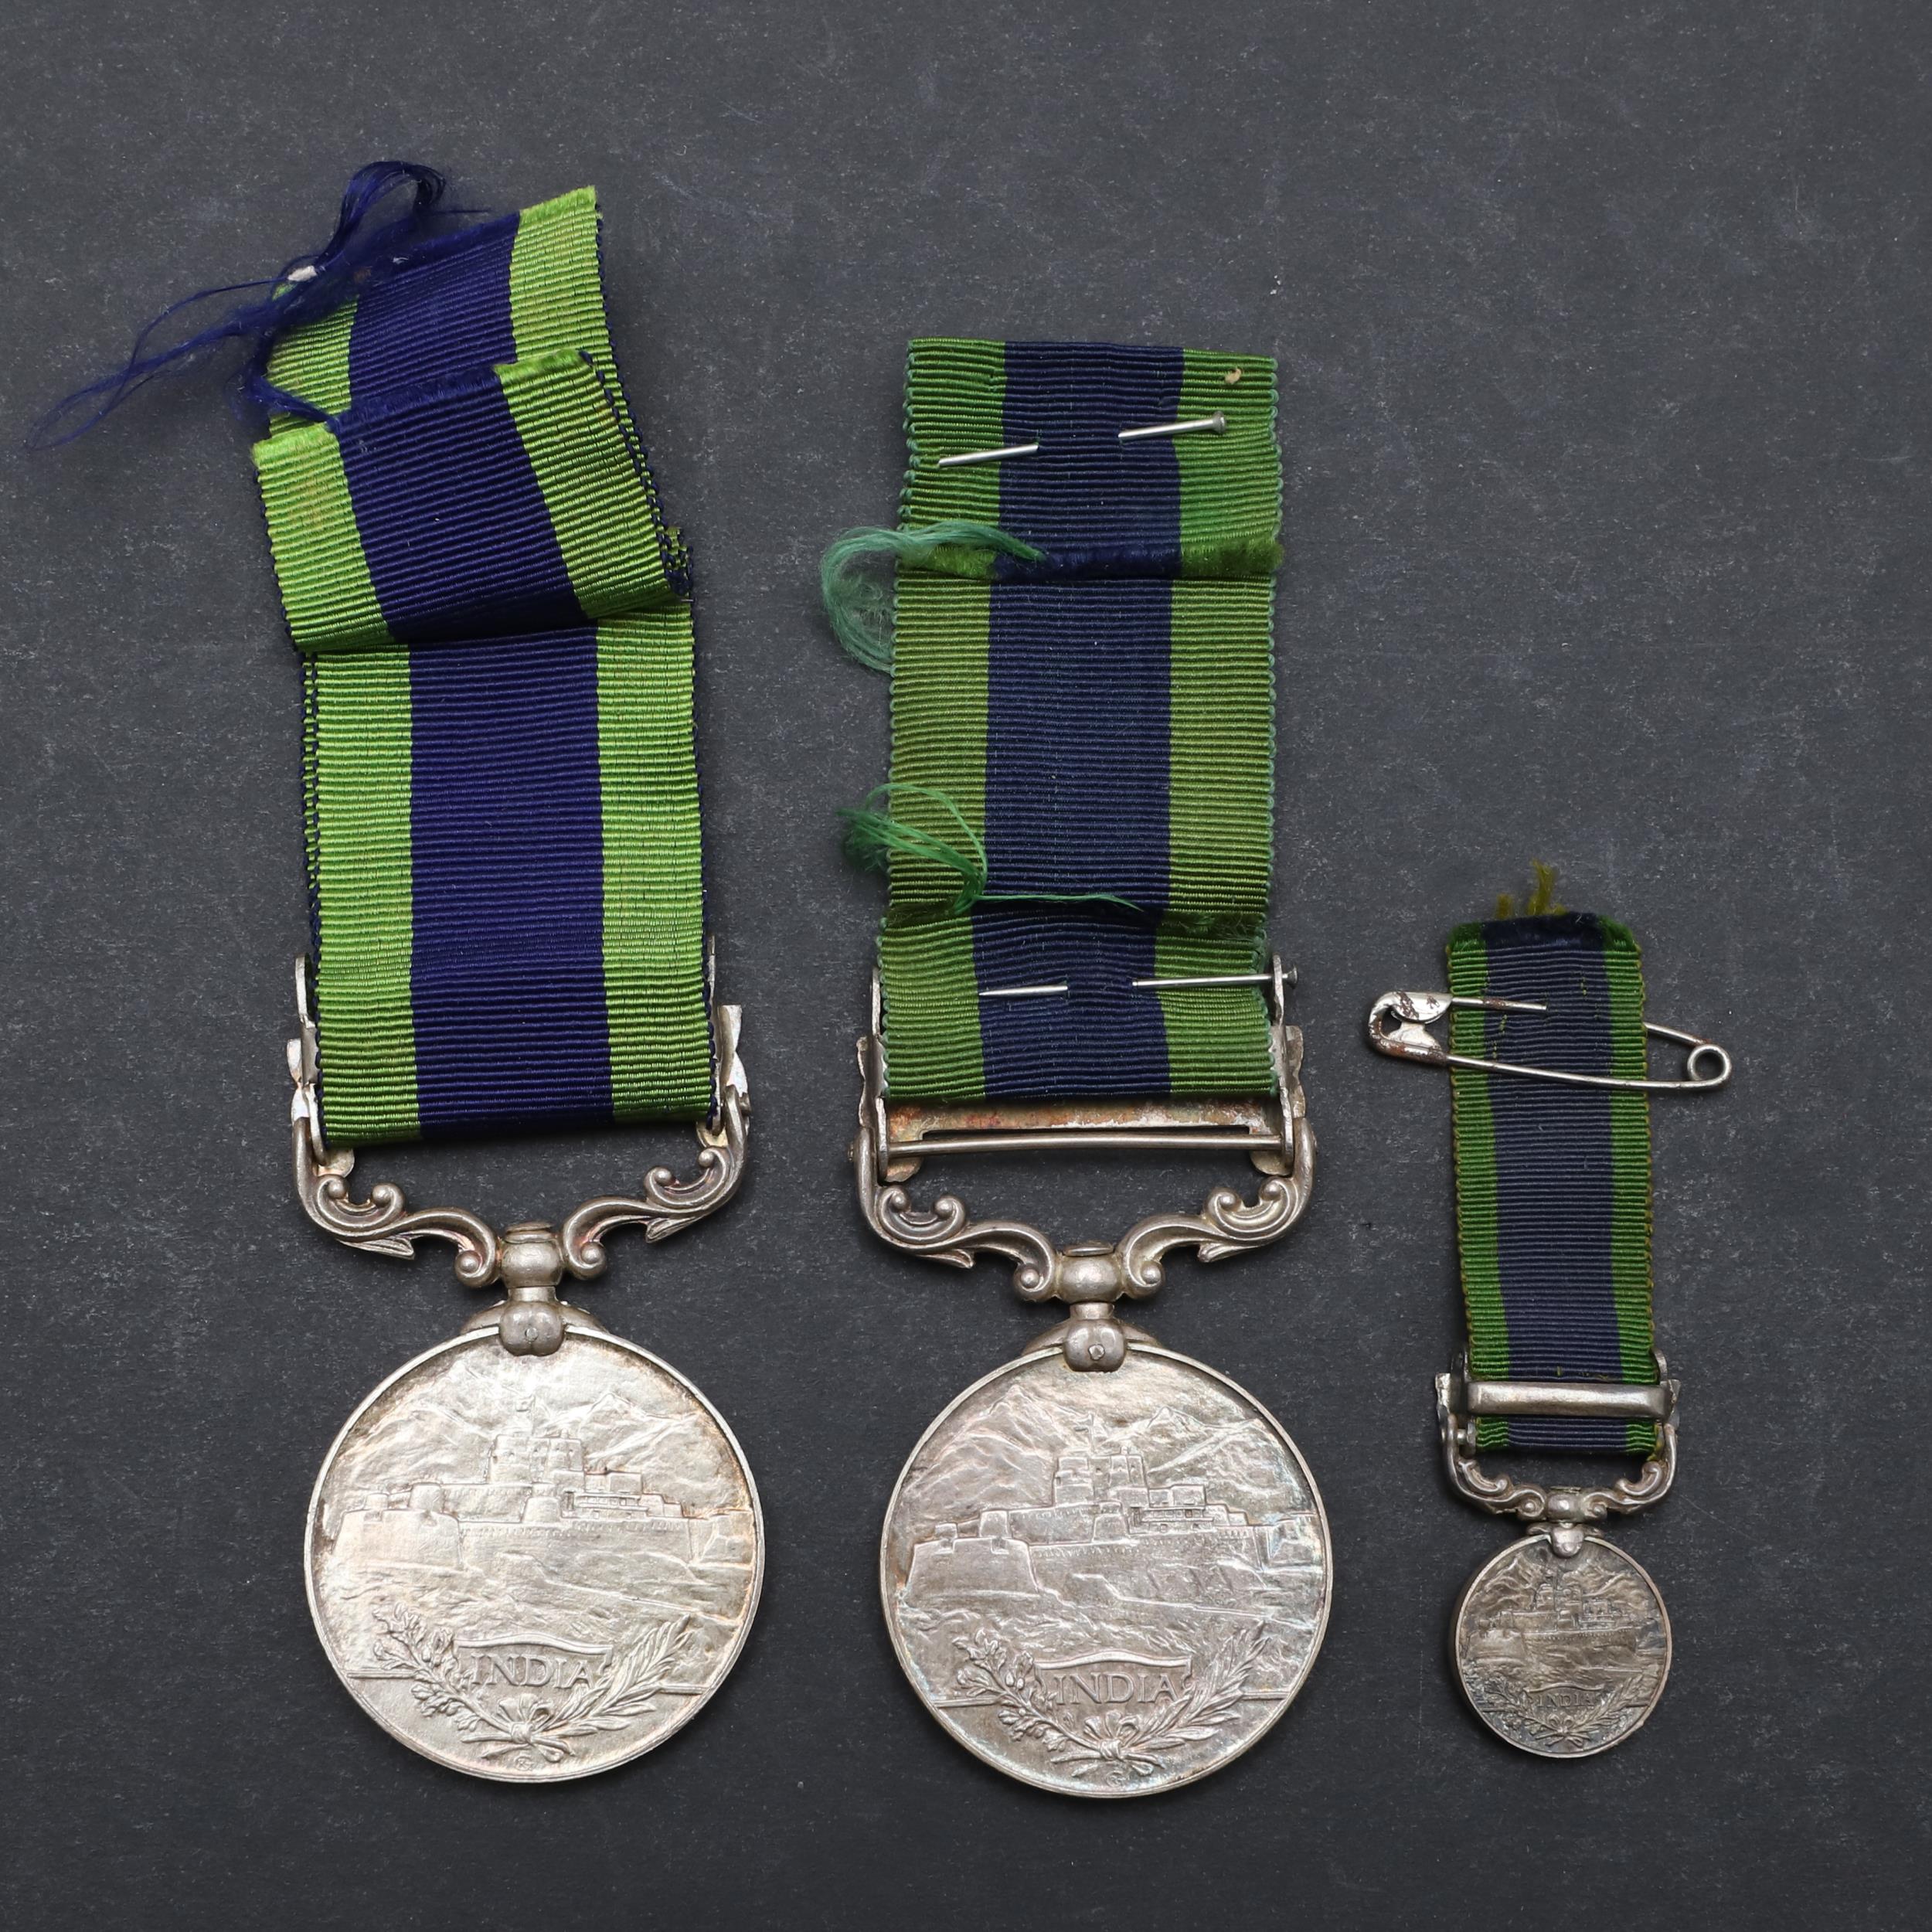 TWO INDIA GENERAL SERVICE MEDALS APPARENTLY AWARDED TO THE SAME MAN, A CASUALTY OF A BOMBING INCIDEN - Bild 5 aus 8